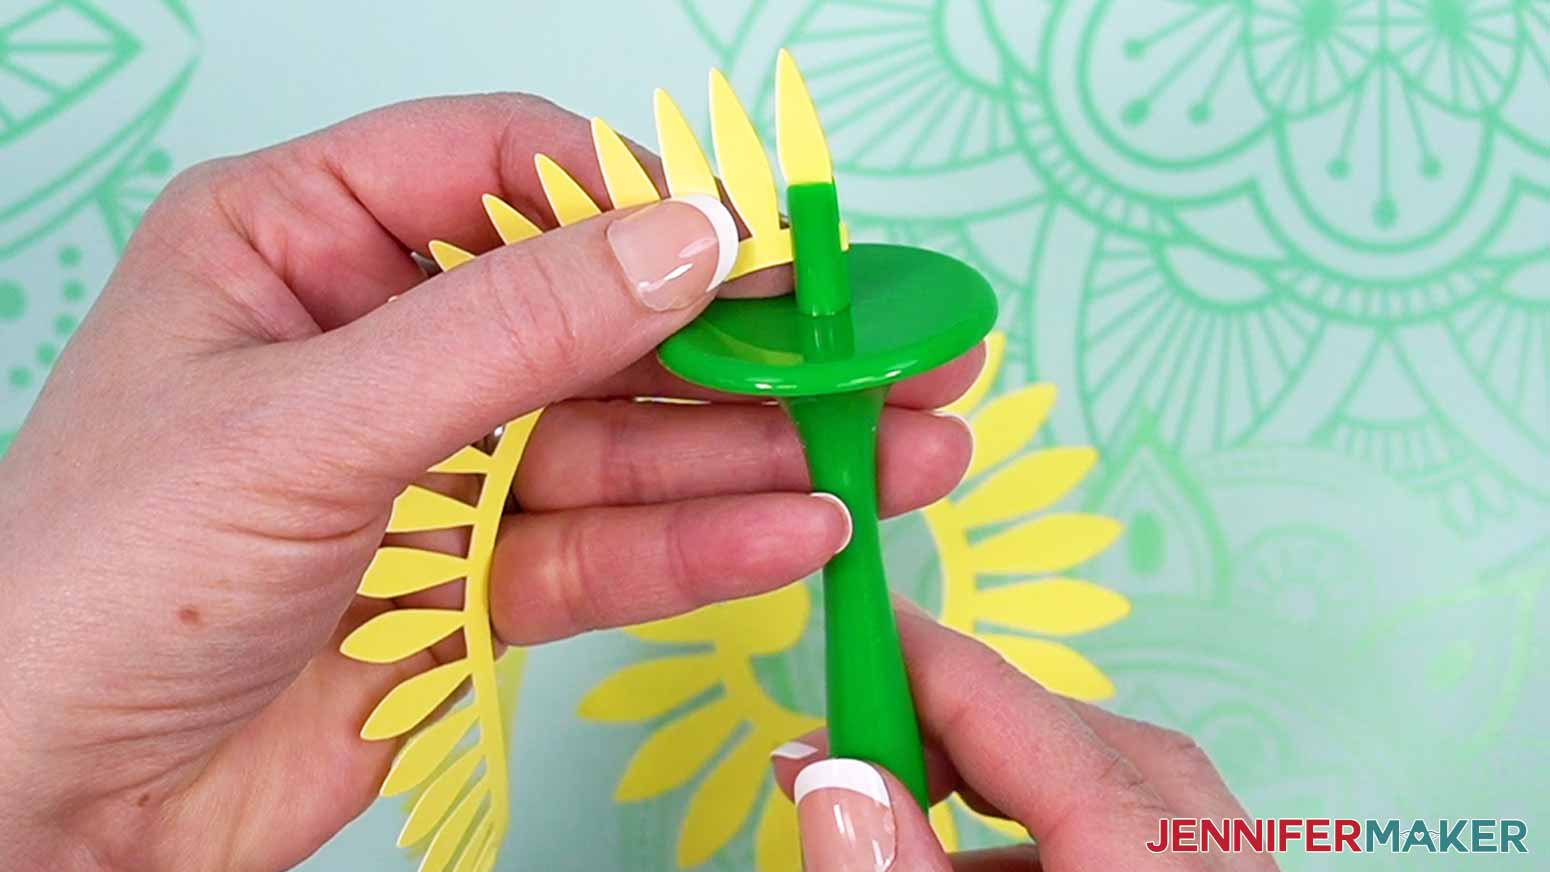 Roll the sunflower with a Flowtool to assemble it.